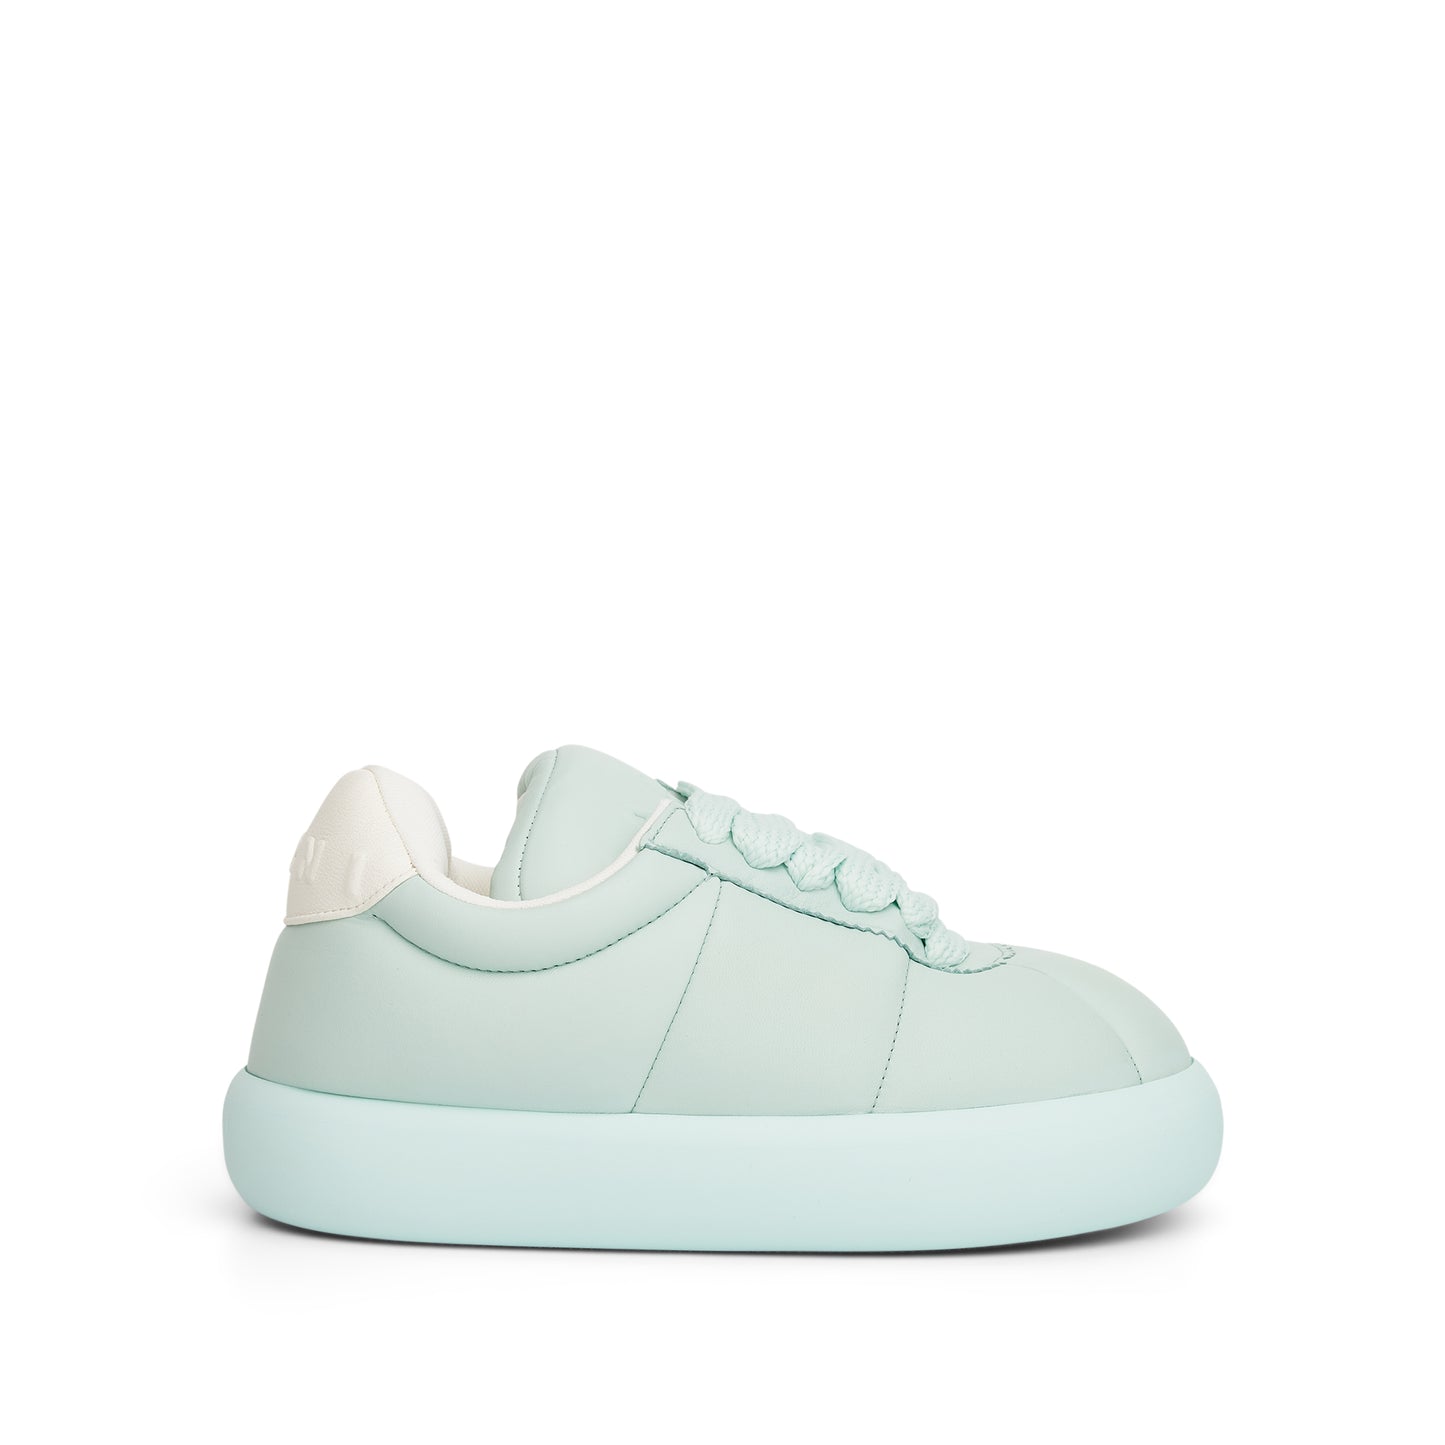 Marni Padded Lace-Up Sneaker in Ice